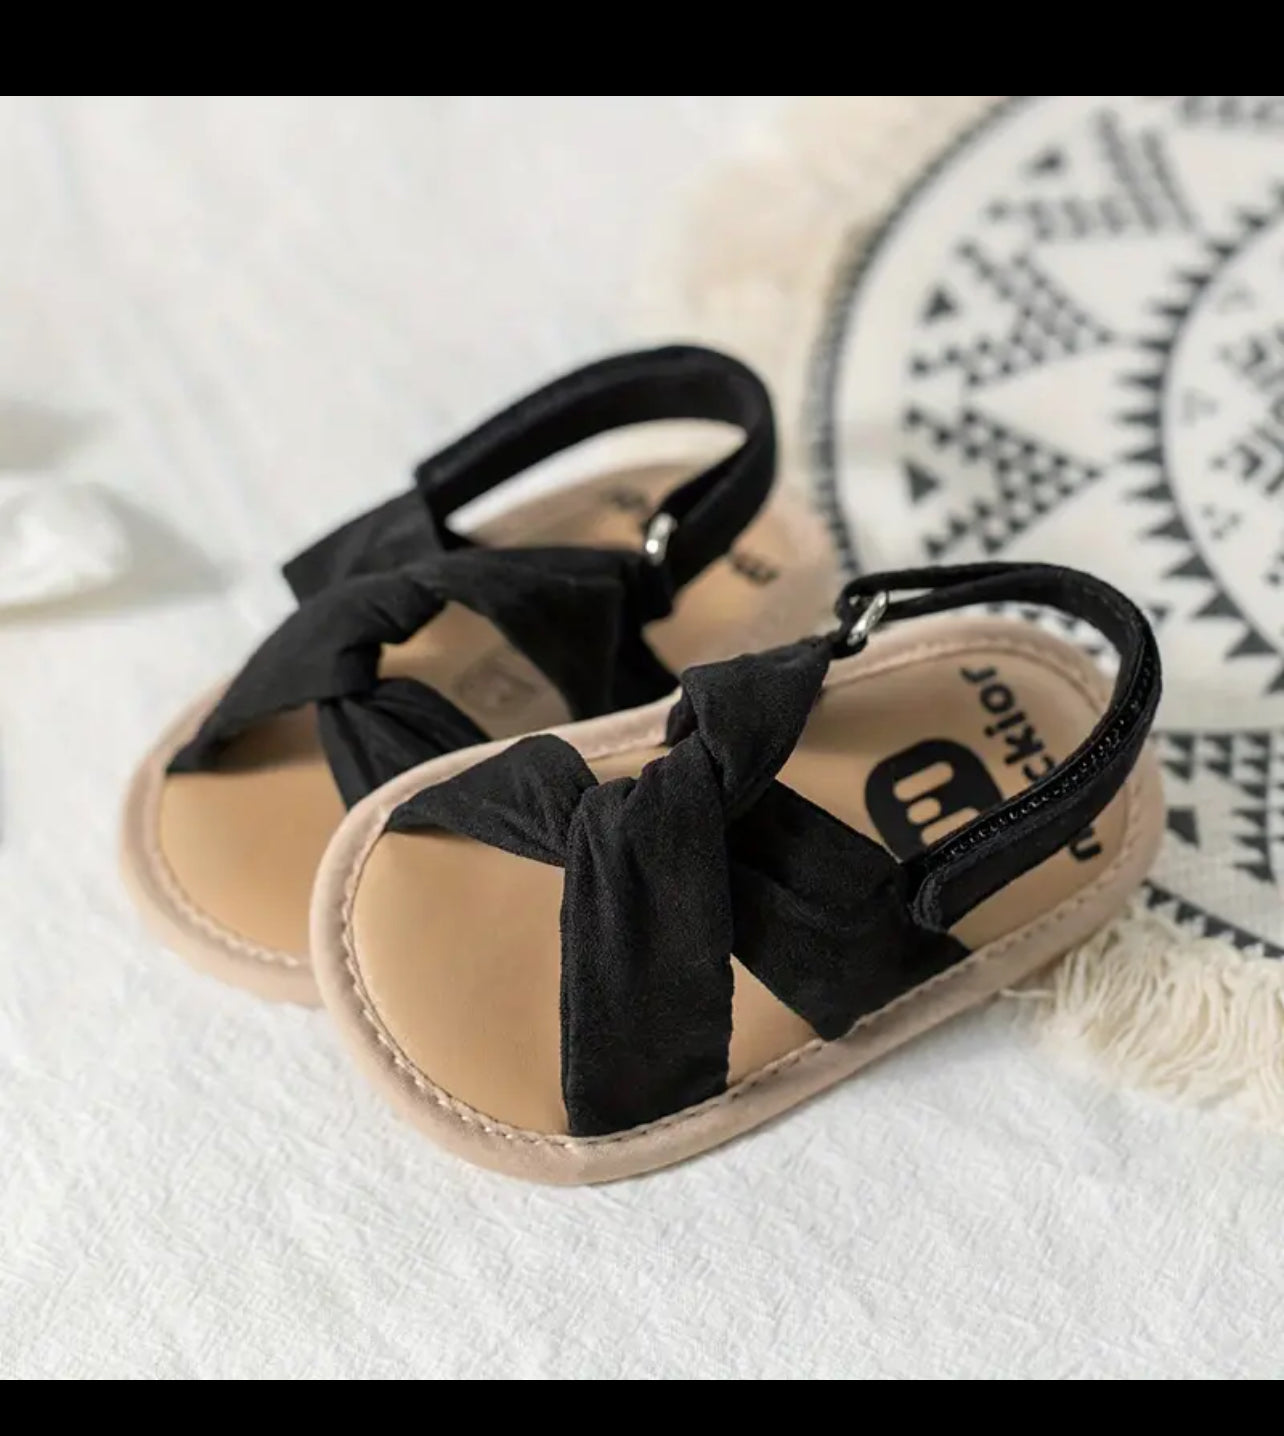 Chic, Casual Solid Color Open Toe Sandals For Baby Girls, Breathable Lightweight, Glam ✨ Baby Collection